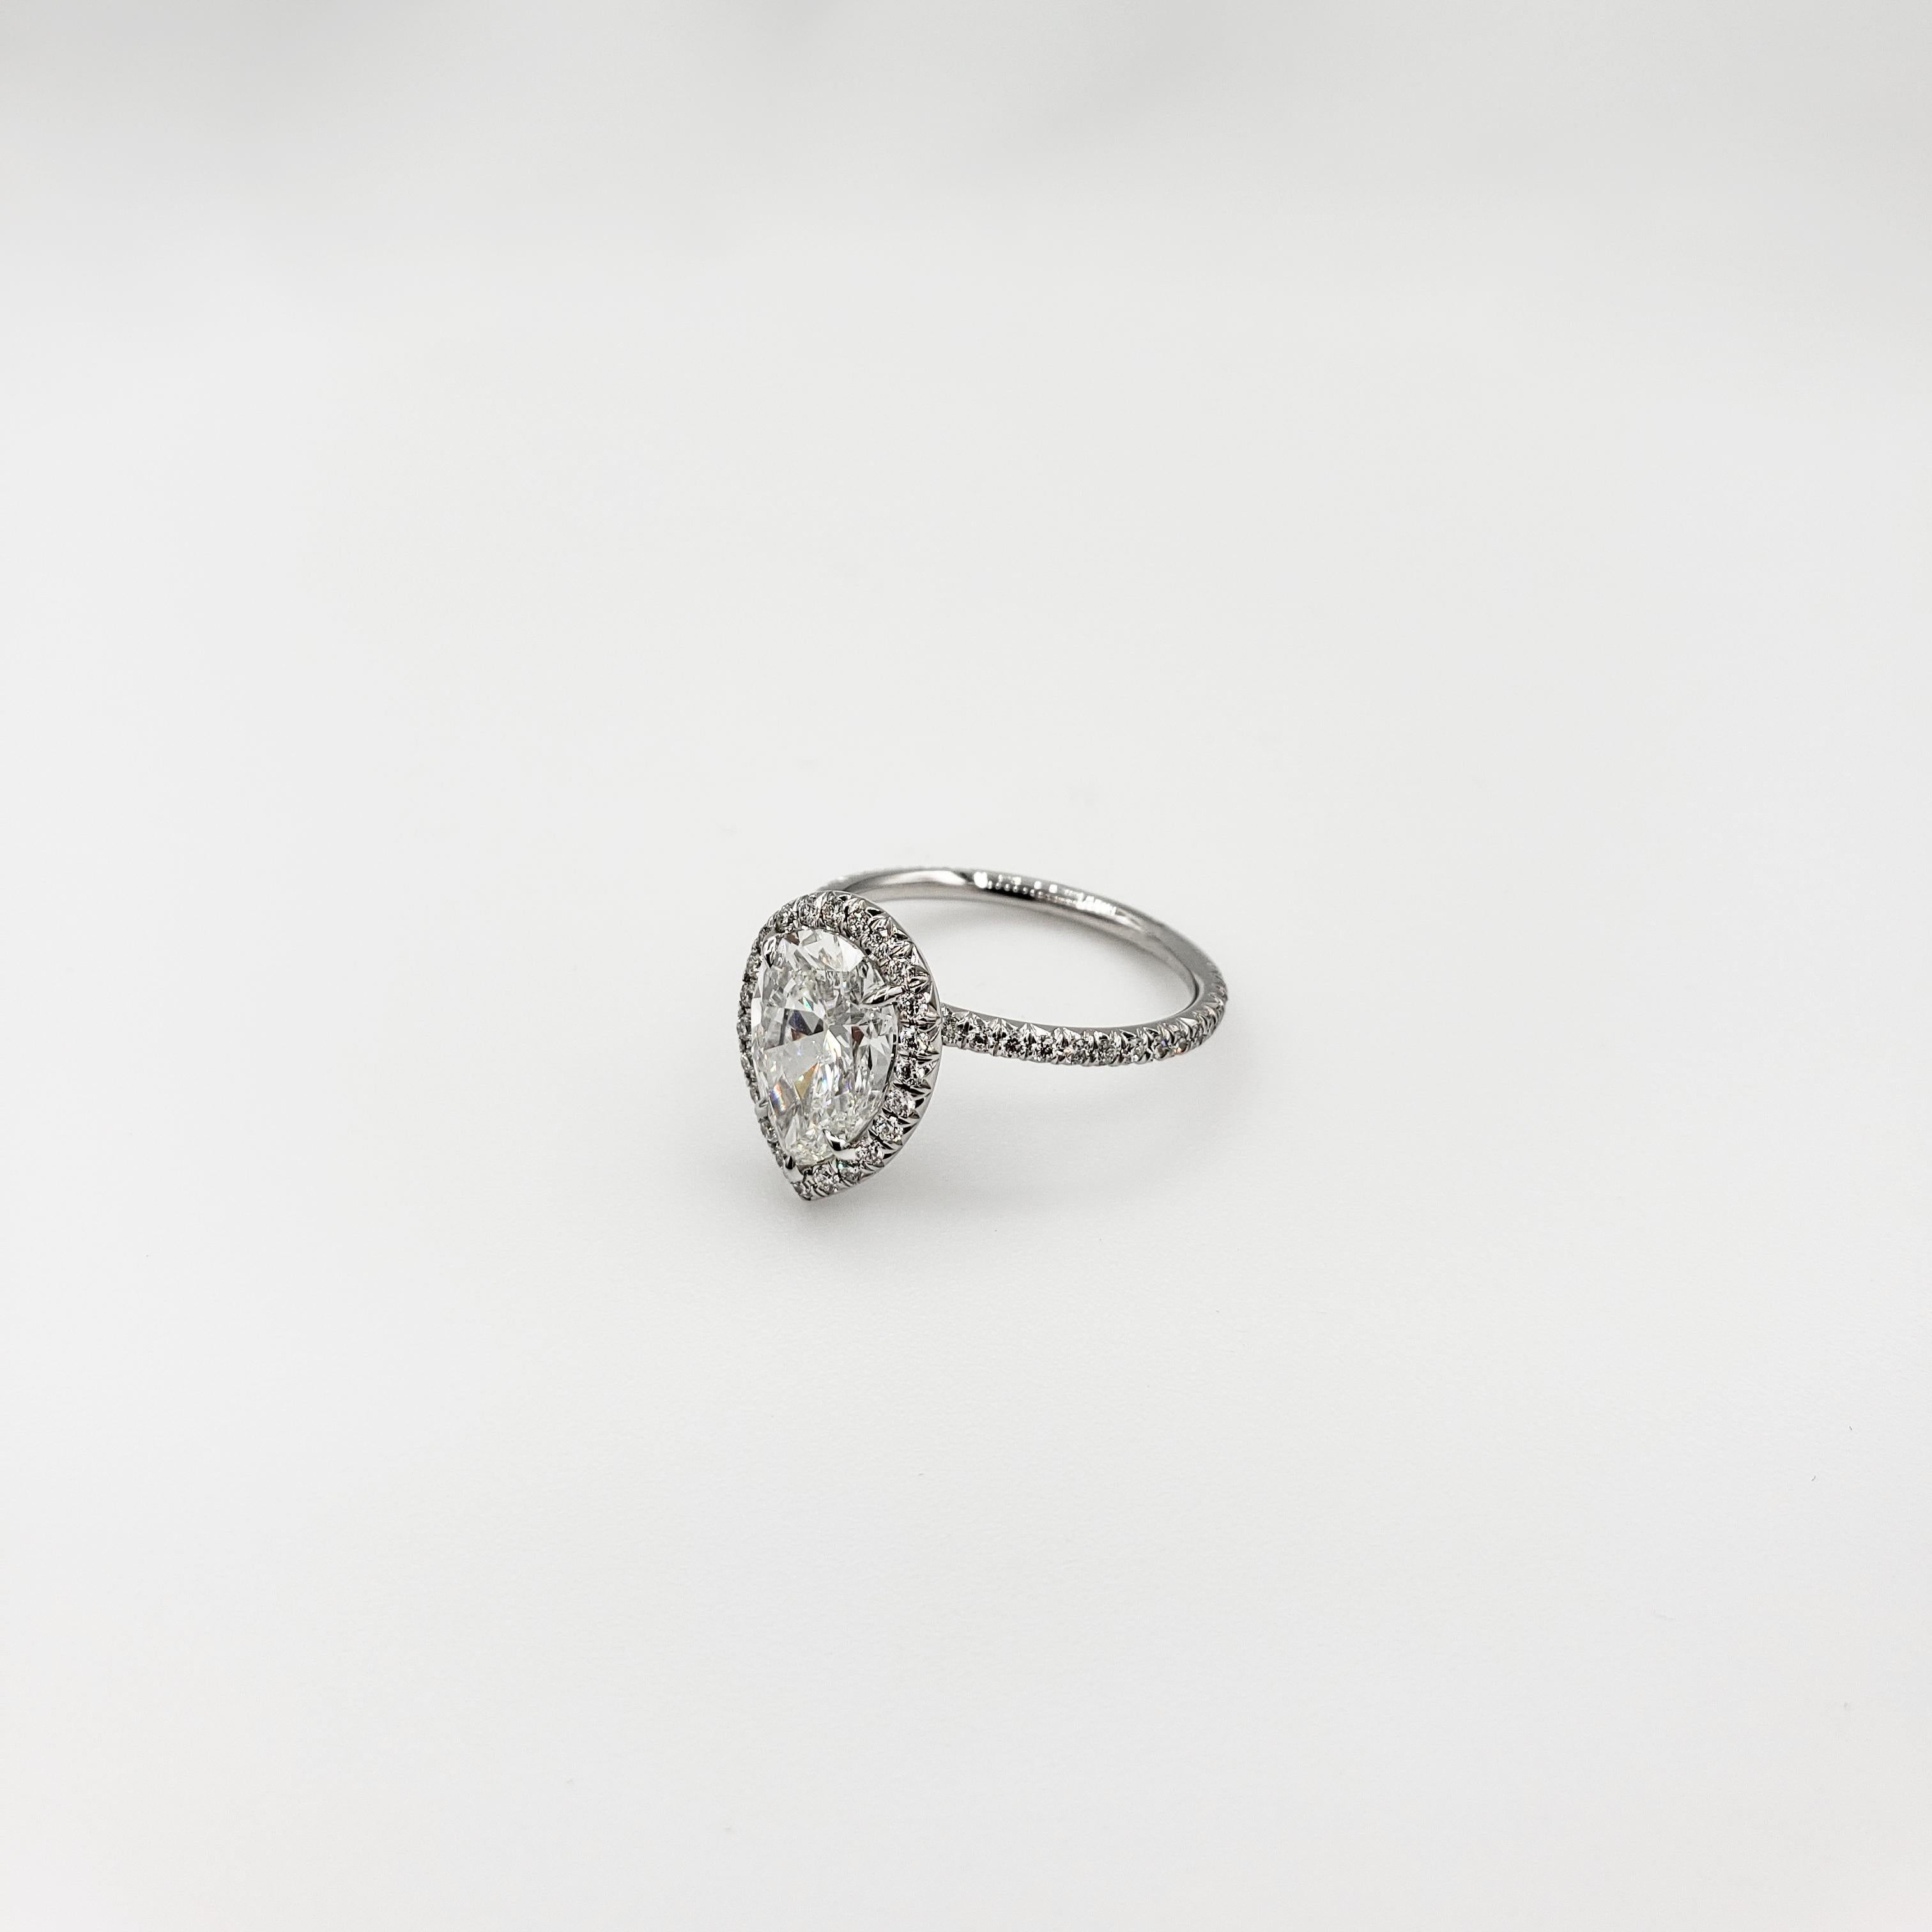 Halo engagement ring design showcasing a 2.01 carat pear shape diamond center stone in a diamond encrusted surmount. GIA report: I color, VS1 clarity. Set in a french pave set diamond band in platinum. Accent diamonds weigh 0.40 carats total. 

